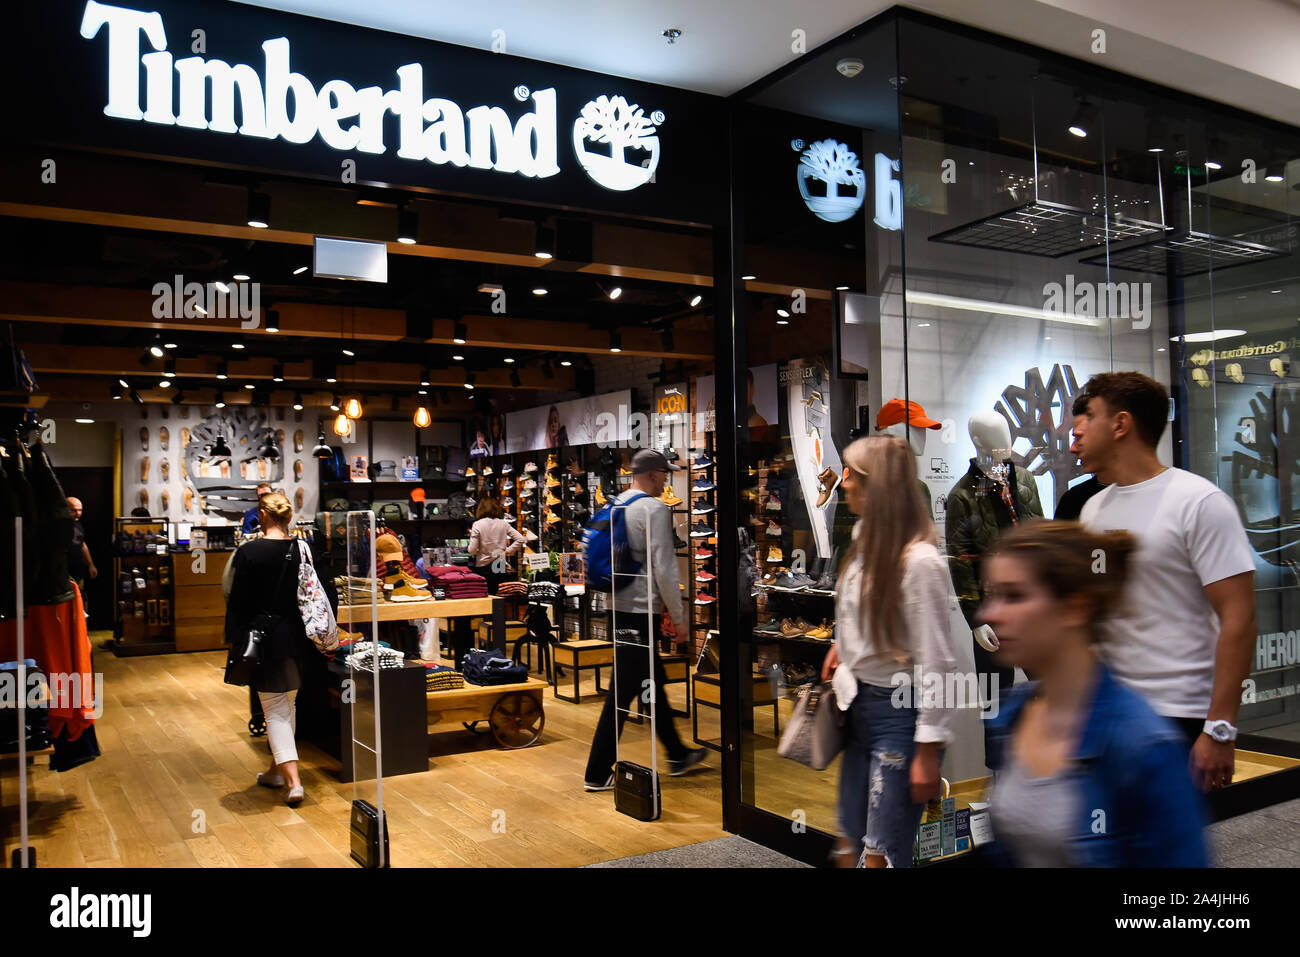 Krakow, Poland. 14th Oct, 2019. People walk past an American retail shop  Timberland. Credit: Omar Marques/SOPA Images/ZUMA Wire/Alamy Live News  Stock Photo - Alamy